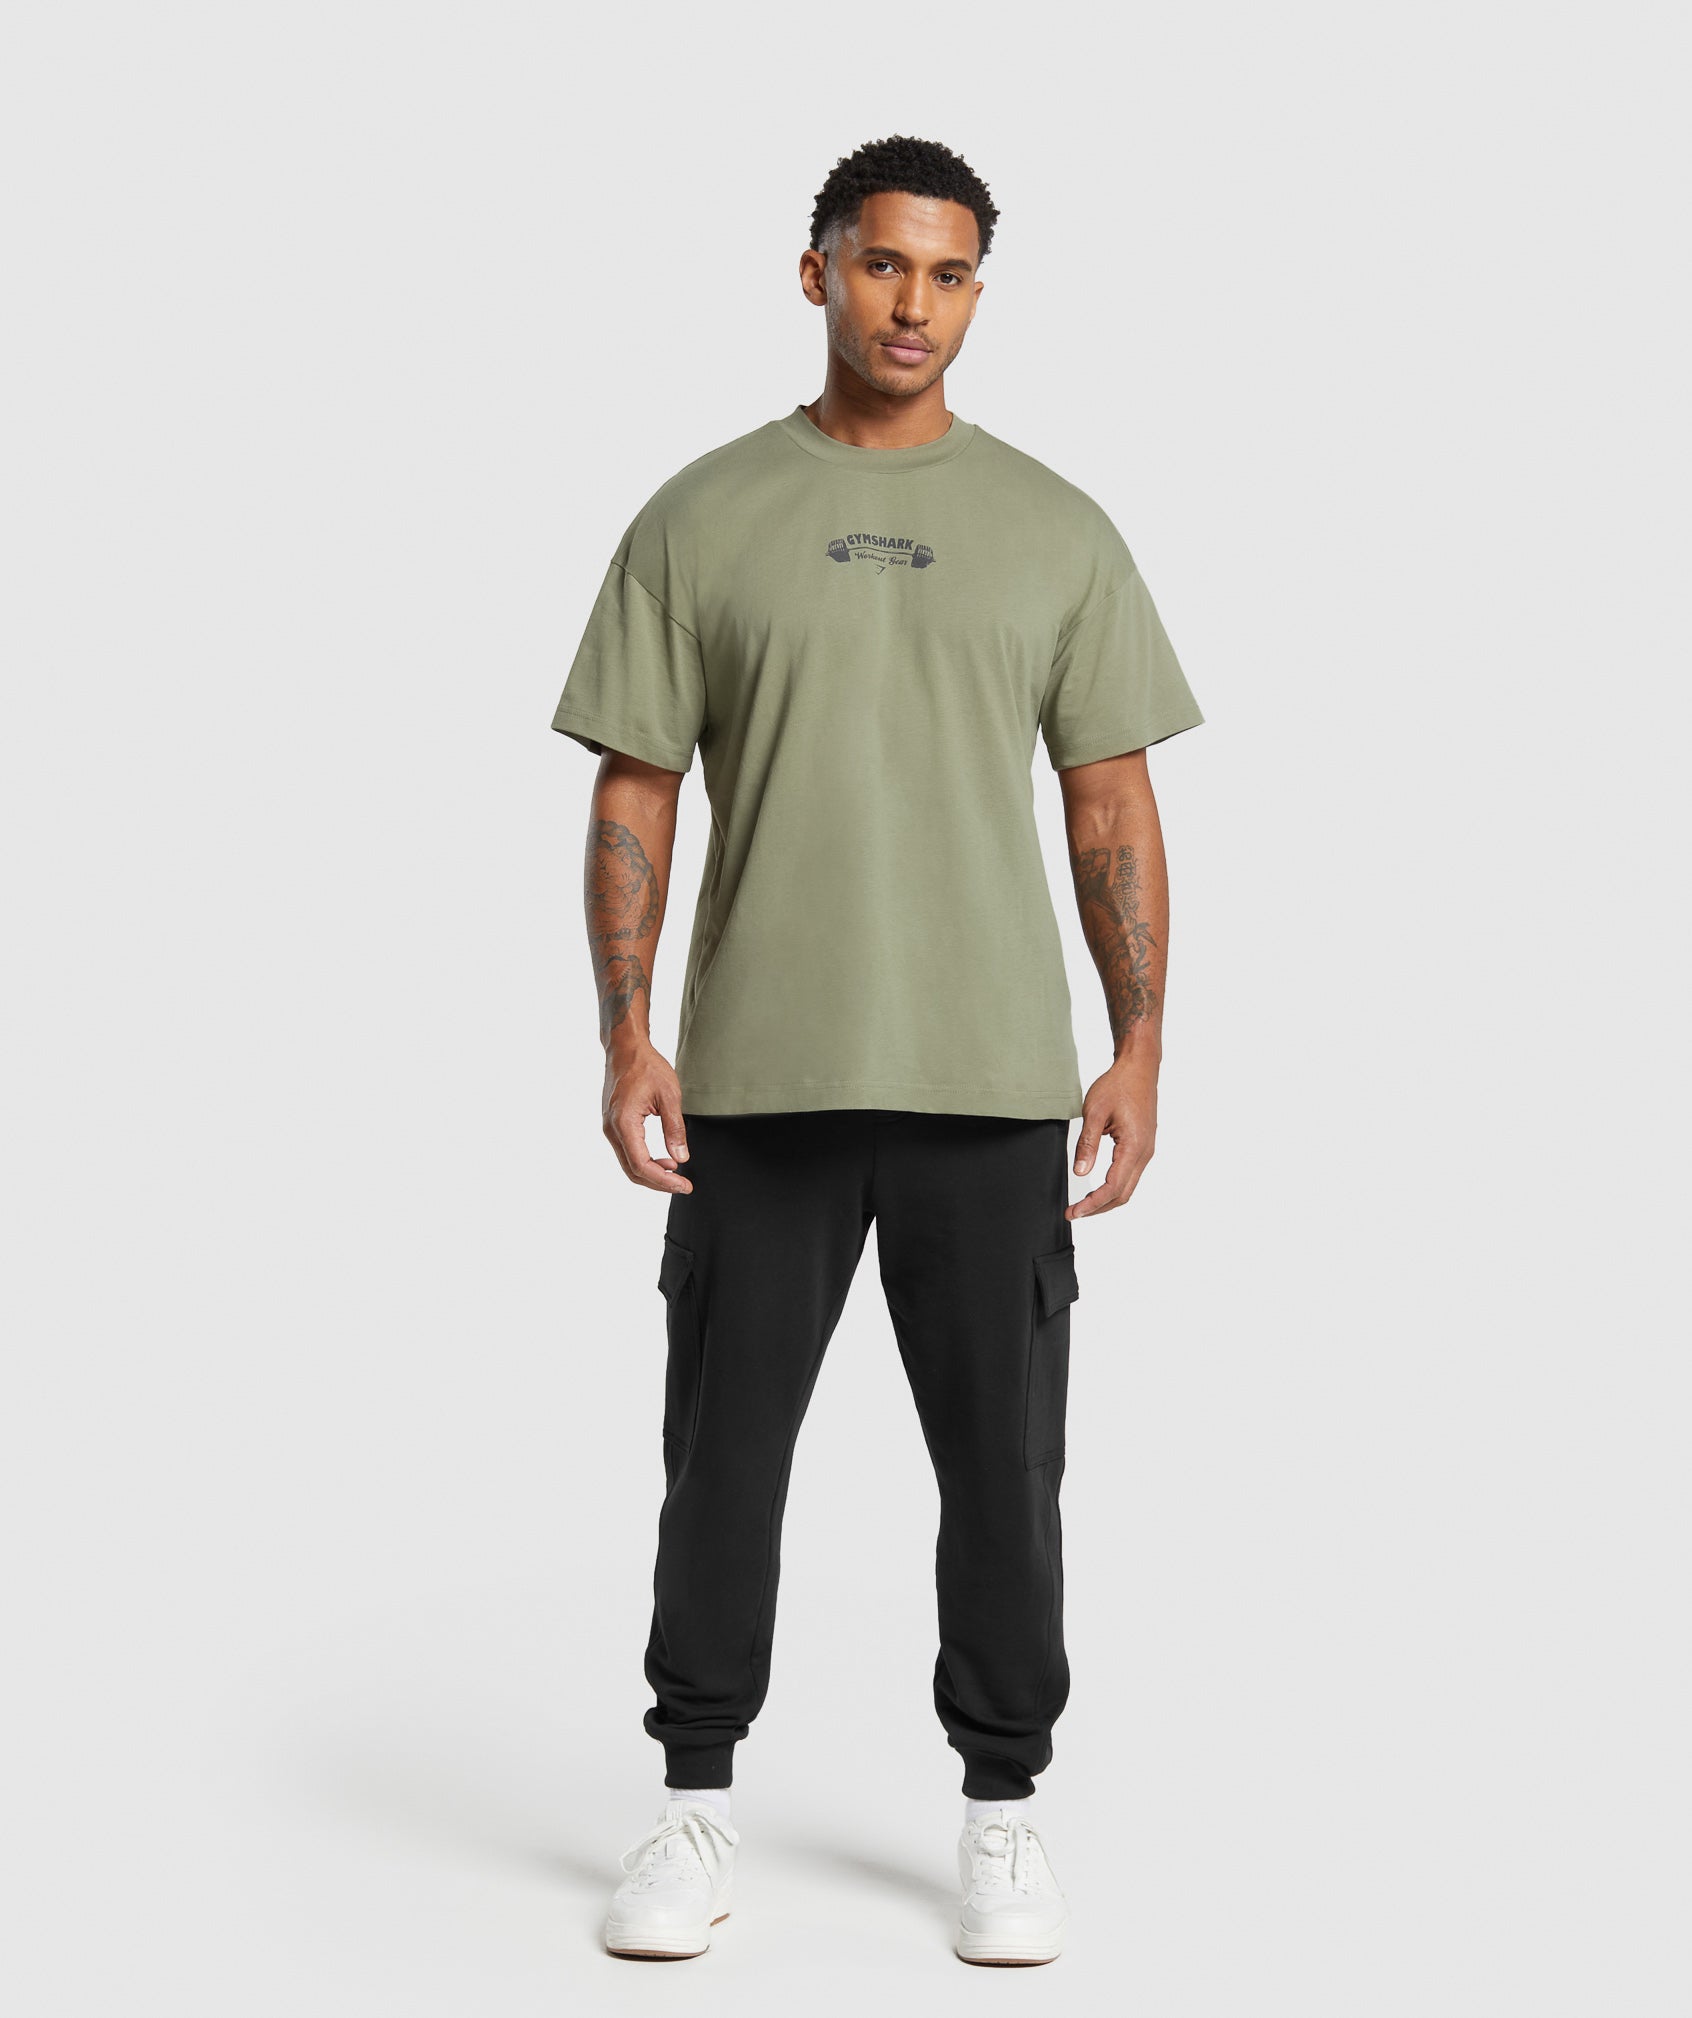 Workout Gear T-Shirt in Utility Green - view 3